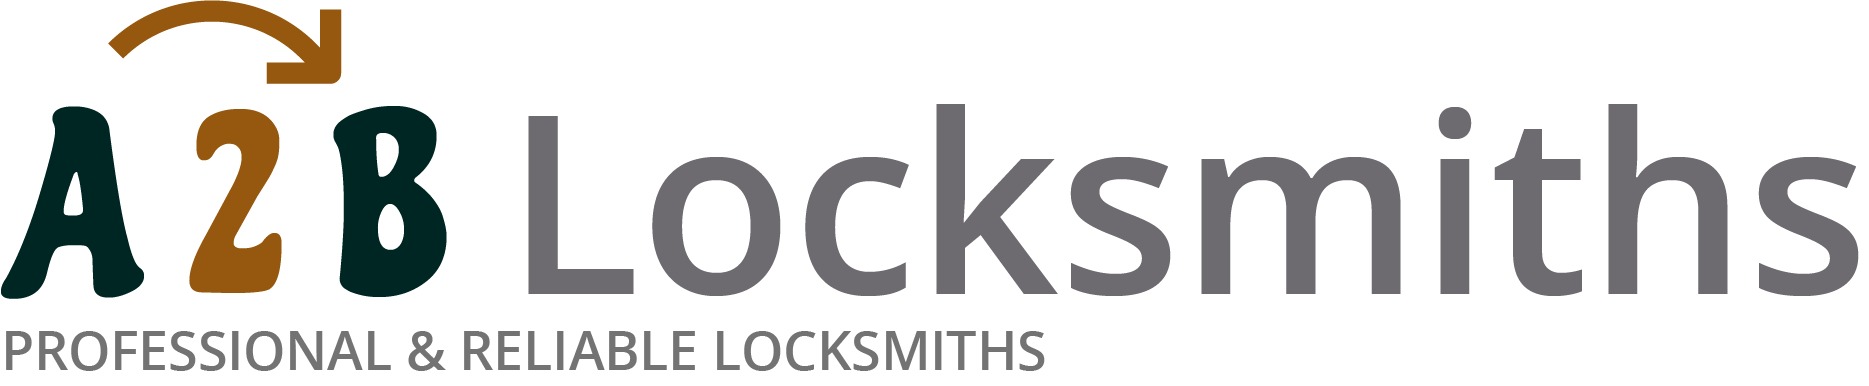 If you are locked out of house in North Ealing, our 24/7 local emergency locksmith services can help you.